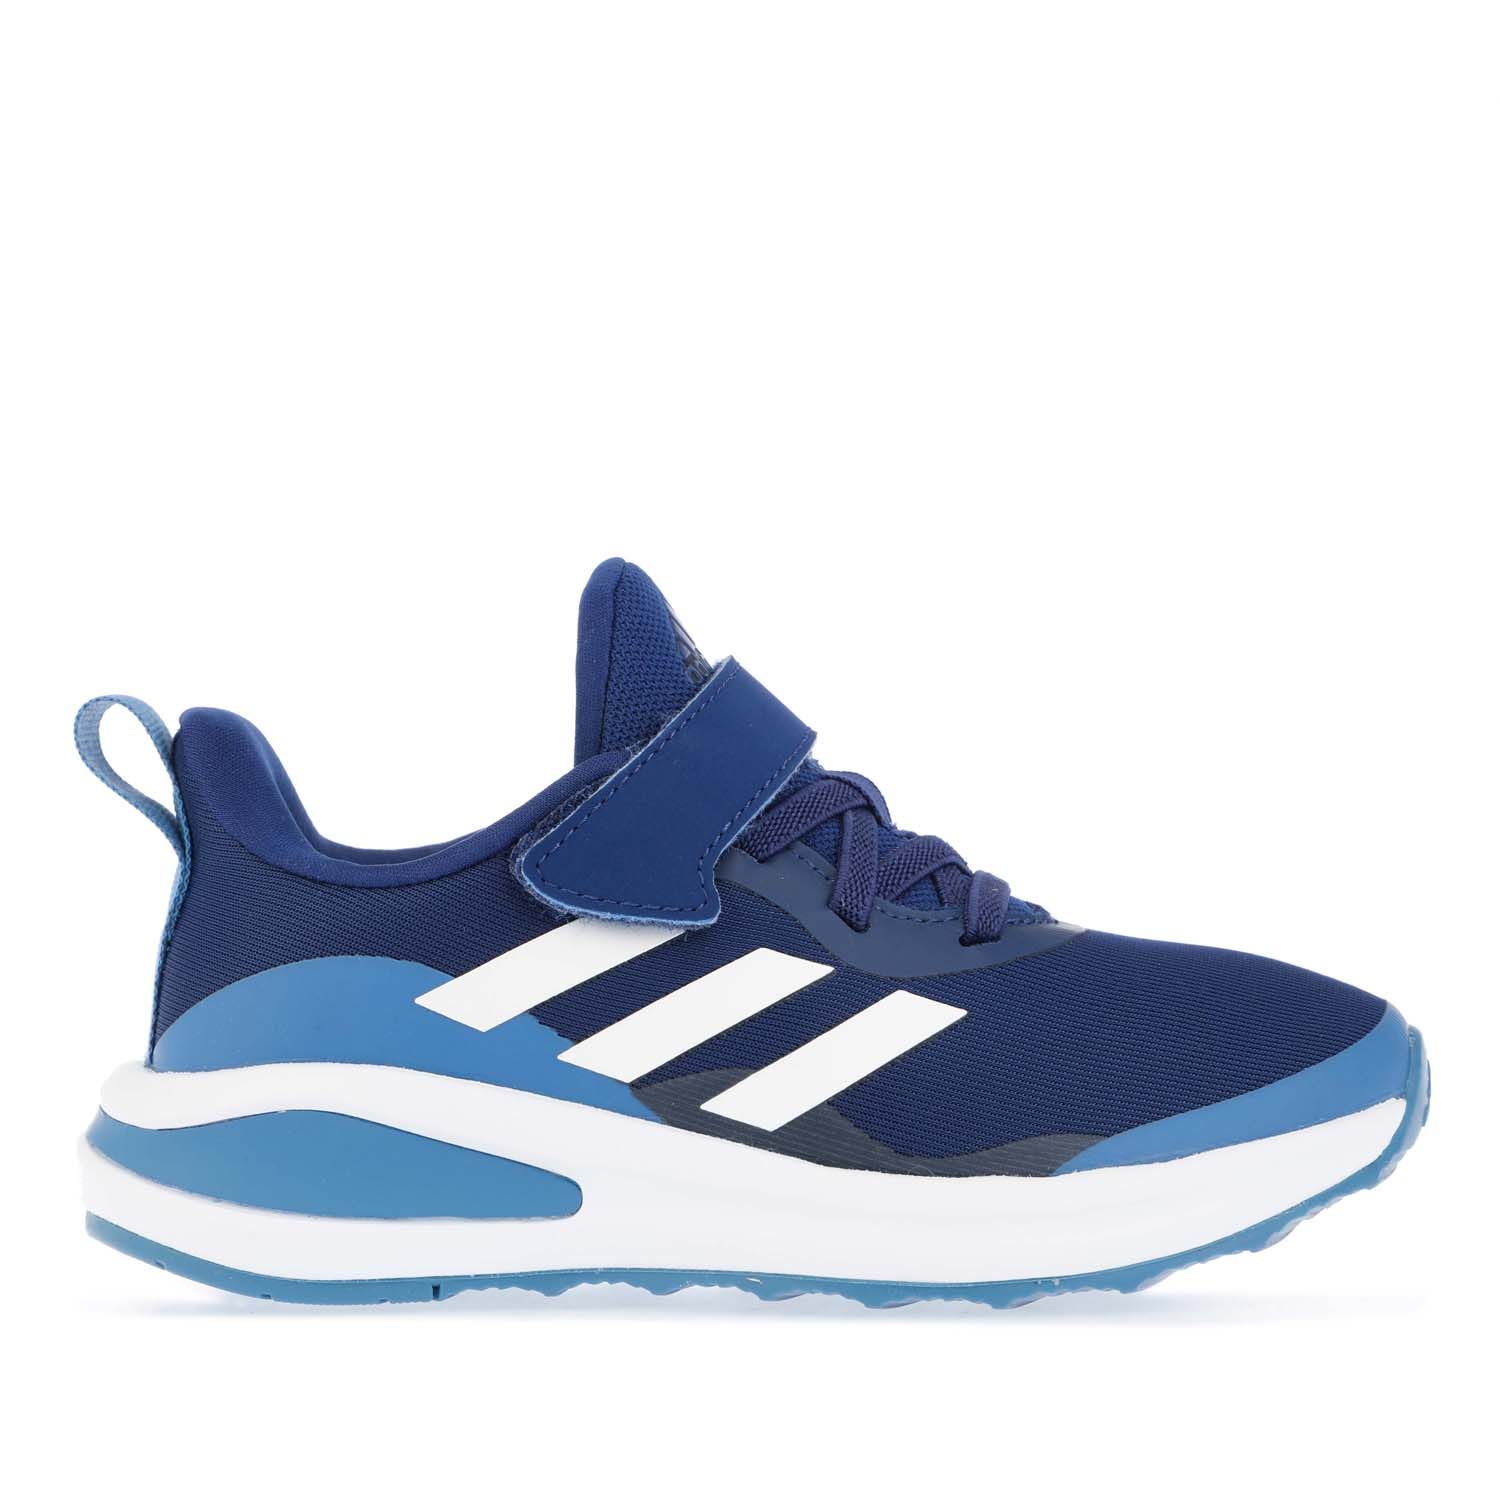 Blue Childrens FortaRun Trainers - The Label